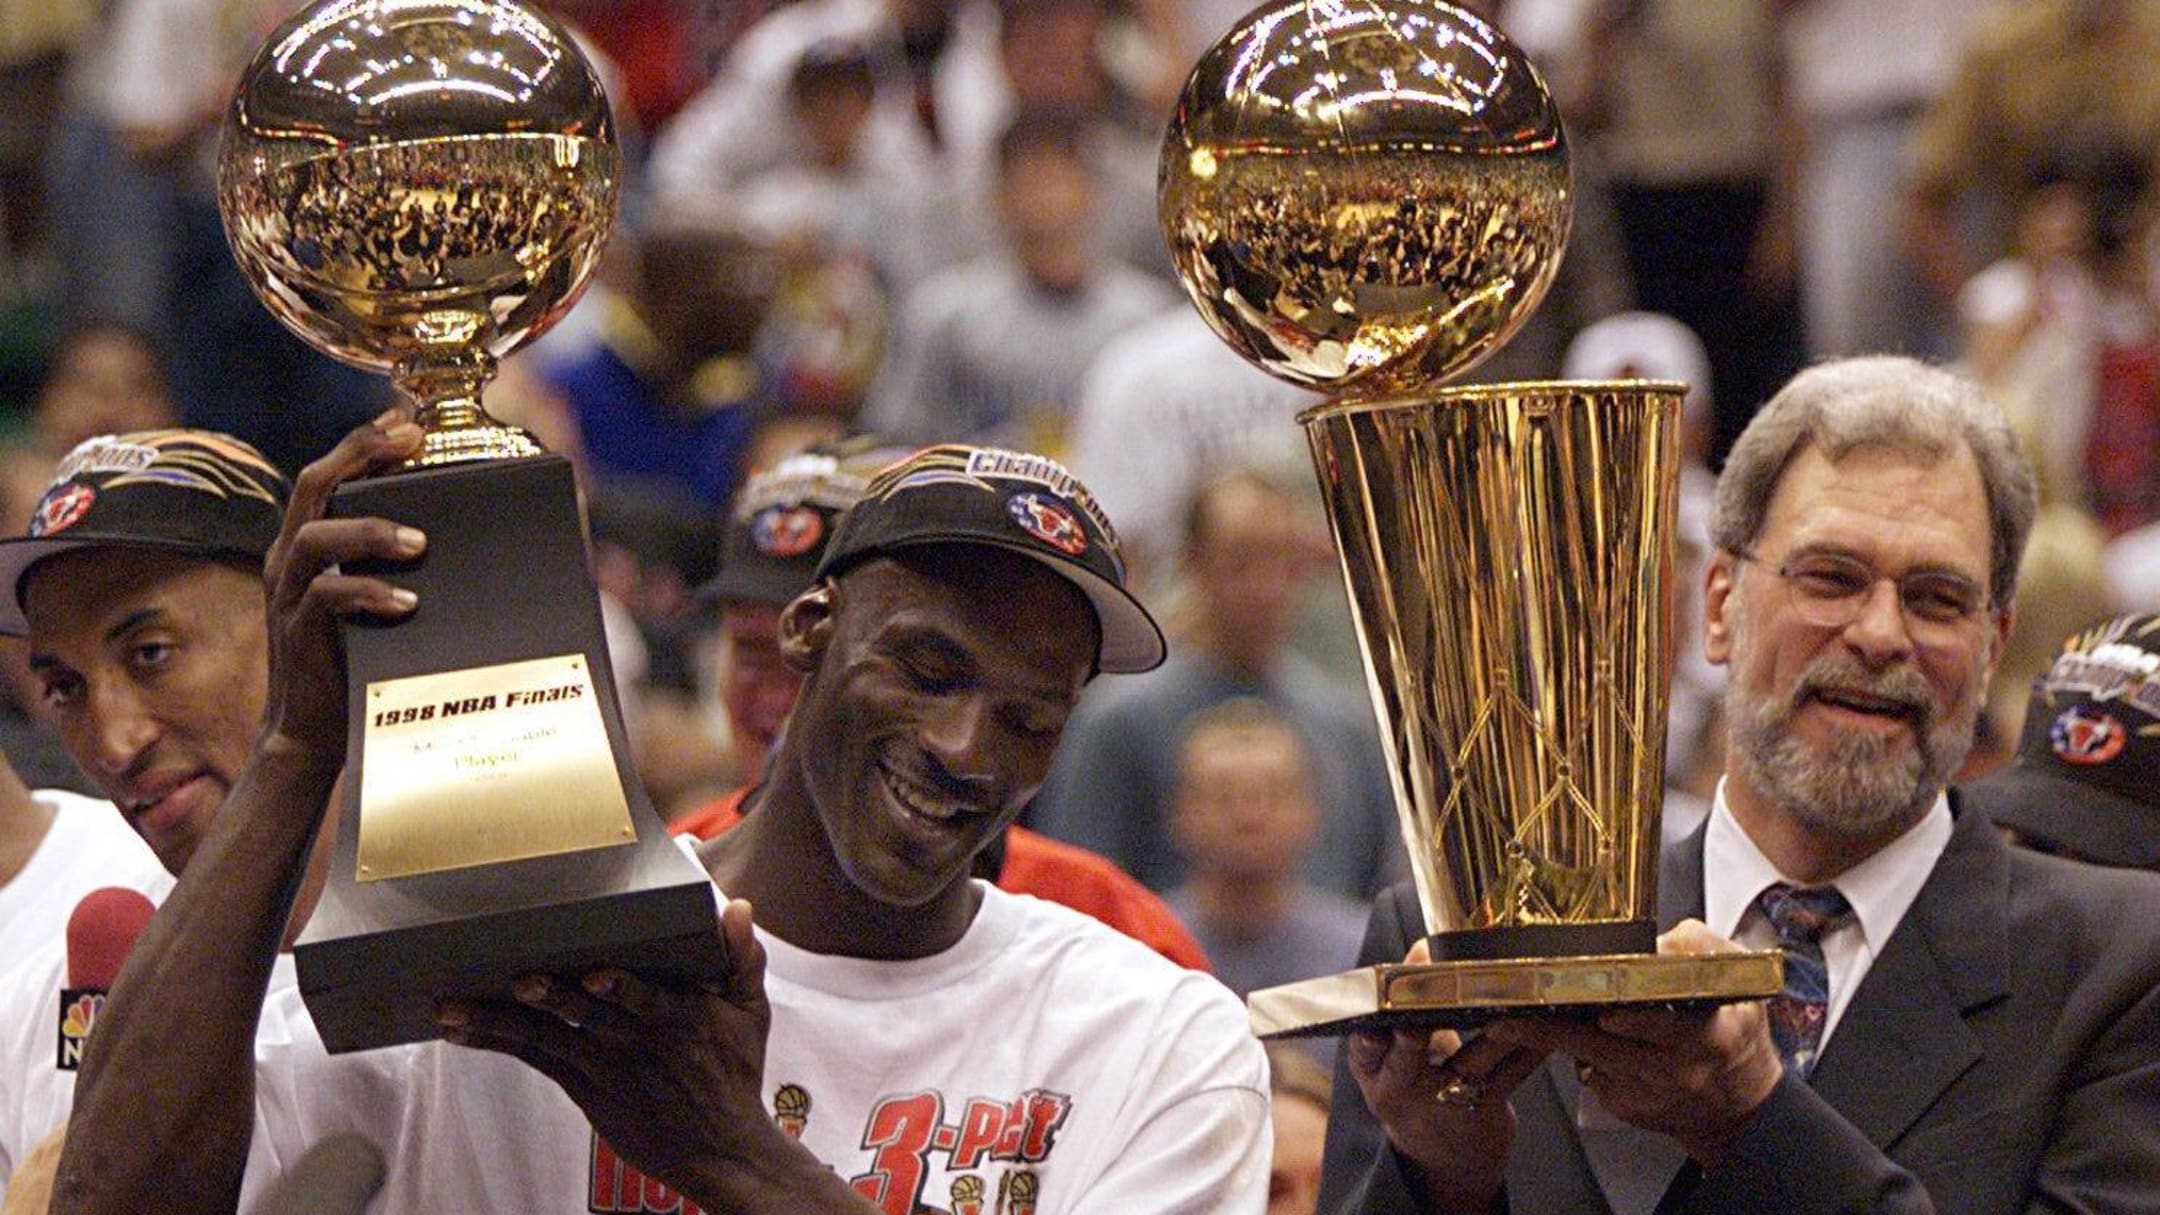 Jordan: Winning 6th NBA Title With Bulls Was 'Trying Year', Chicago News